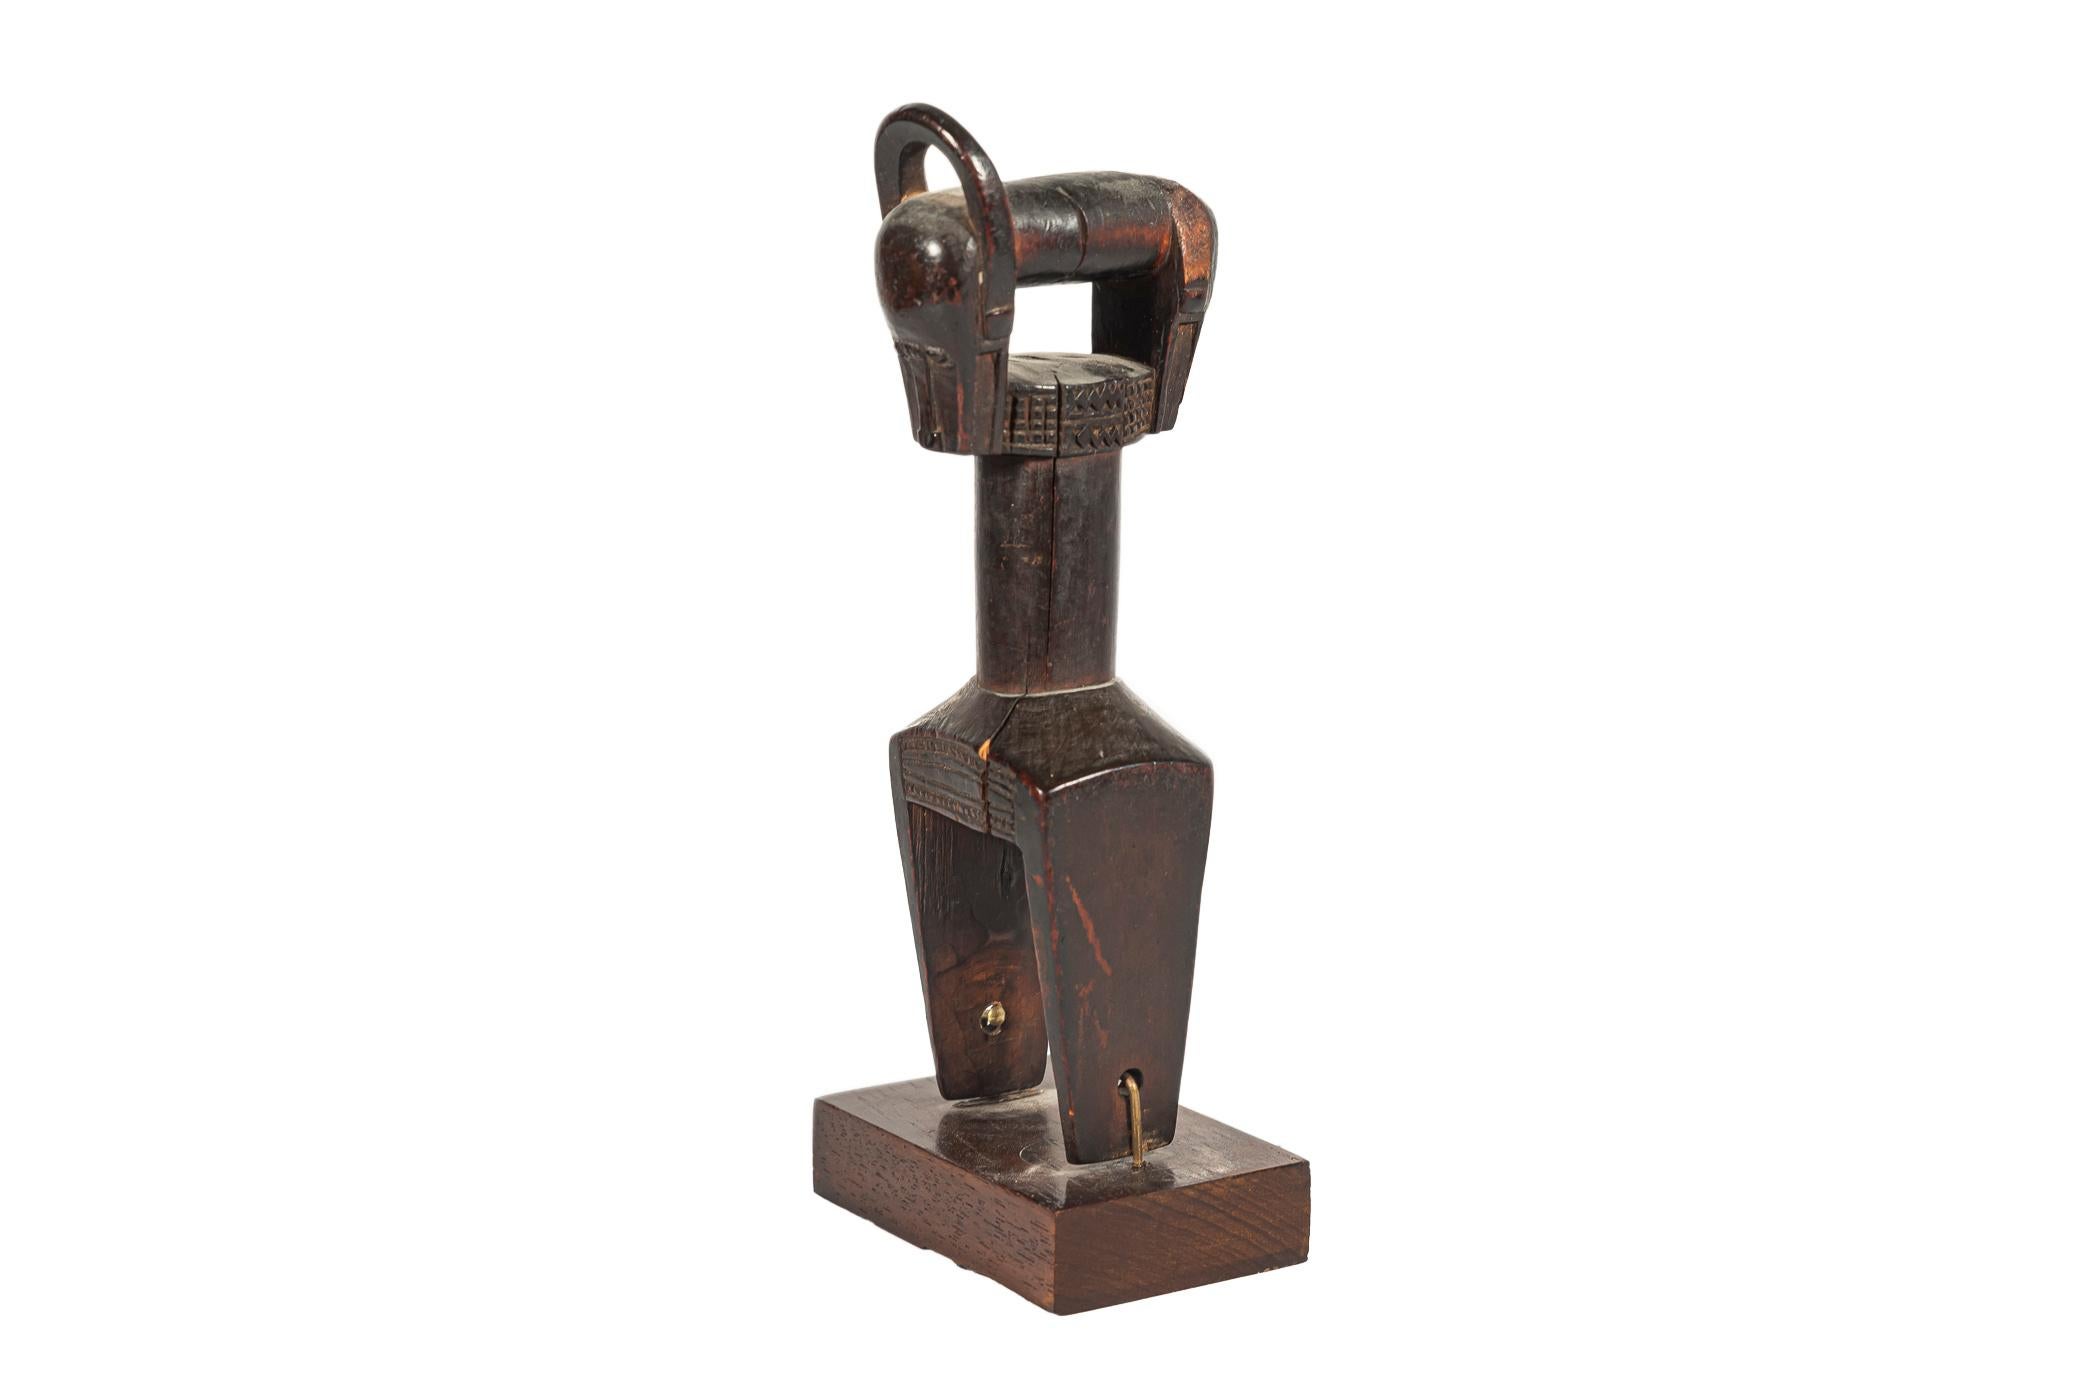 Double Baoule weaving pulley, 
Brown patina wood,
Two Janus heads,
Horn missing on one head,
Ivory Coast, early 20th century.

Measures: Height 20 cm, depth 8 cm, width 6 cm.

In Côte d'Ivoire, the most ordinary objects a priori had to meet